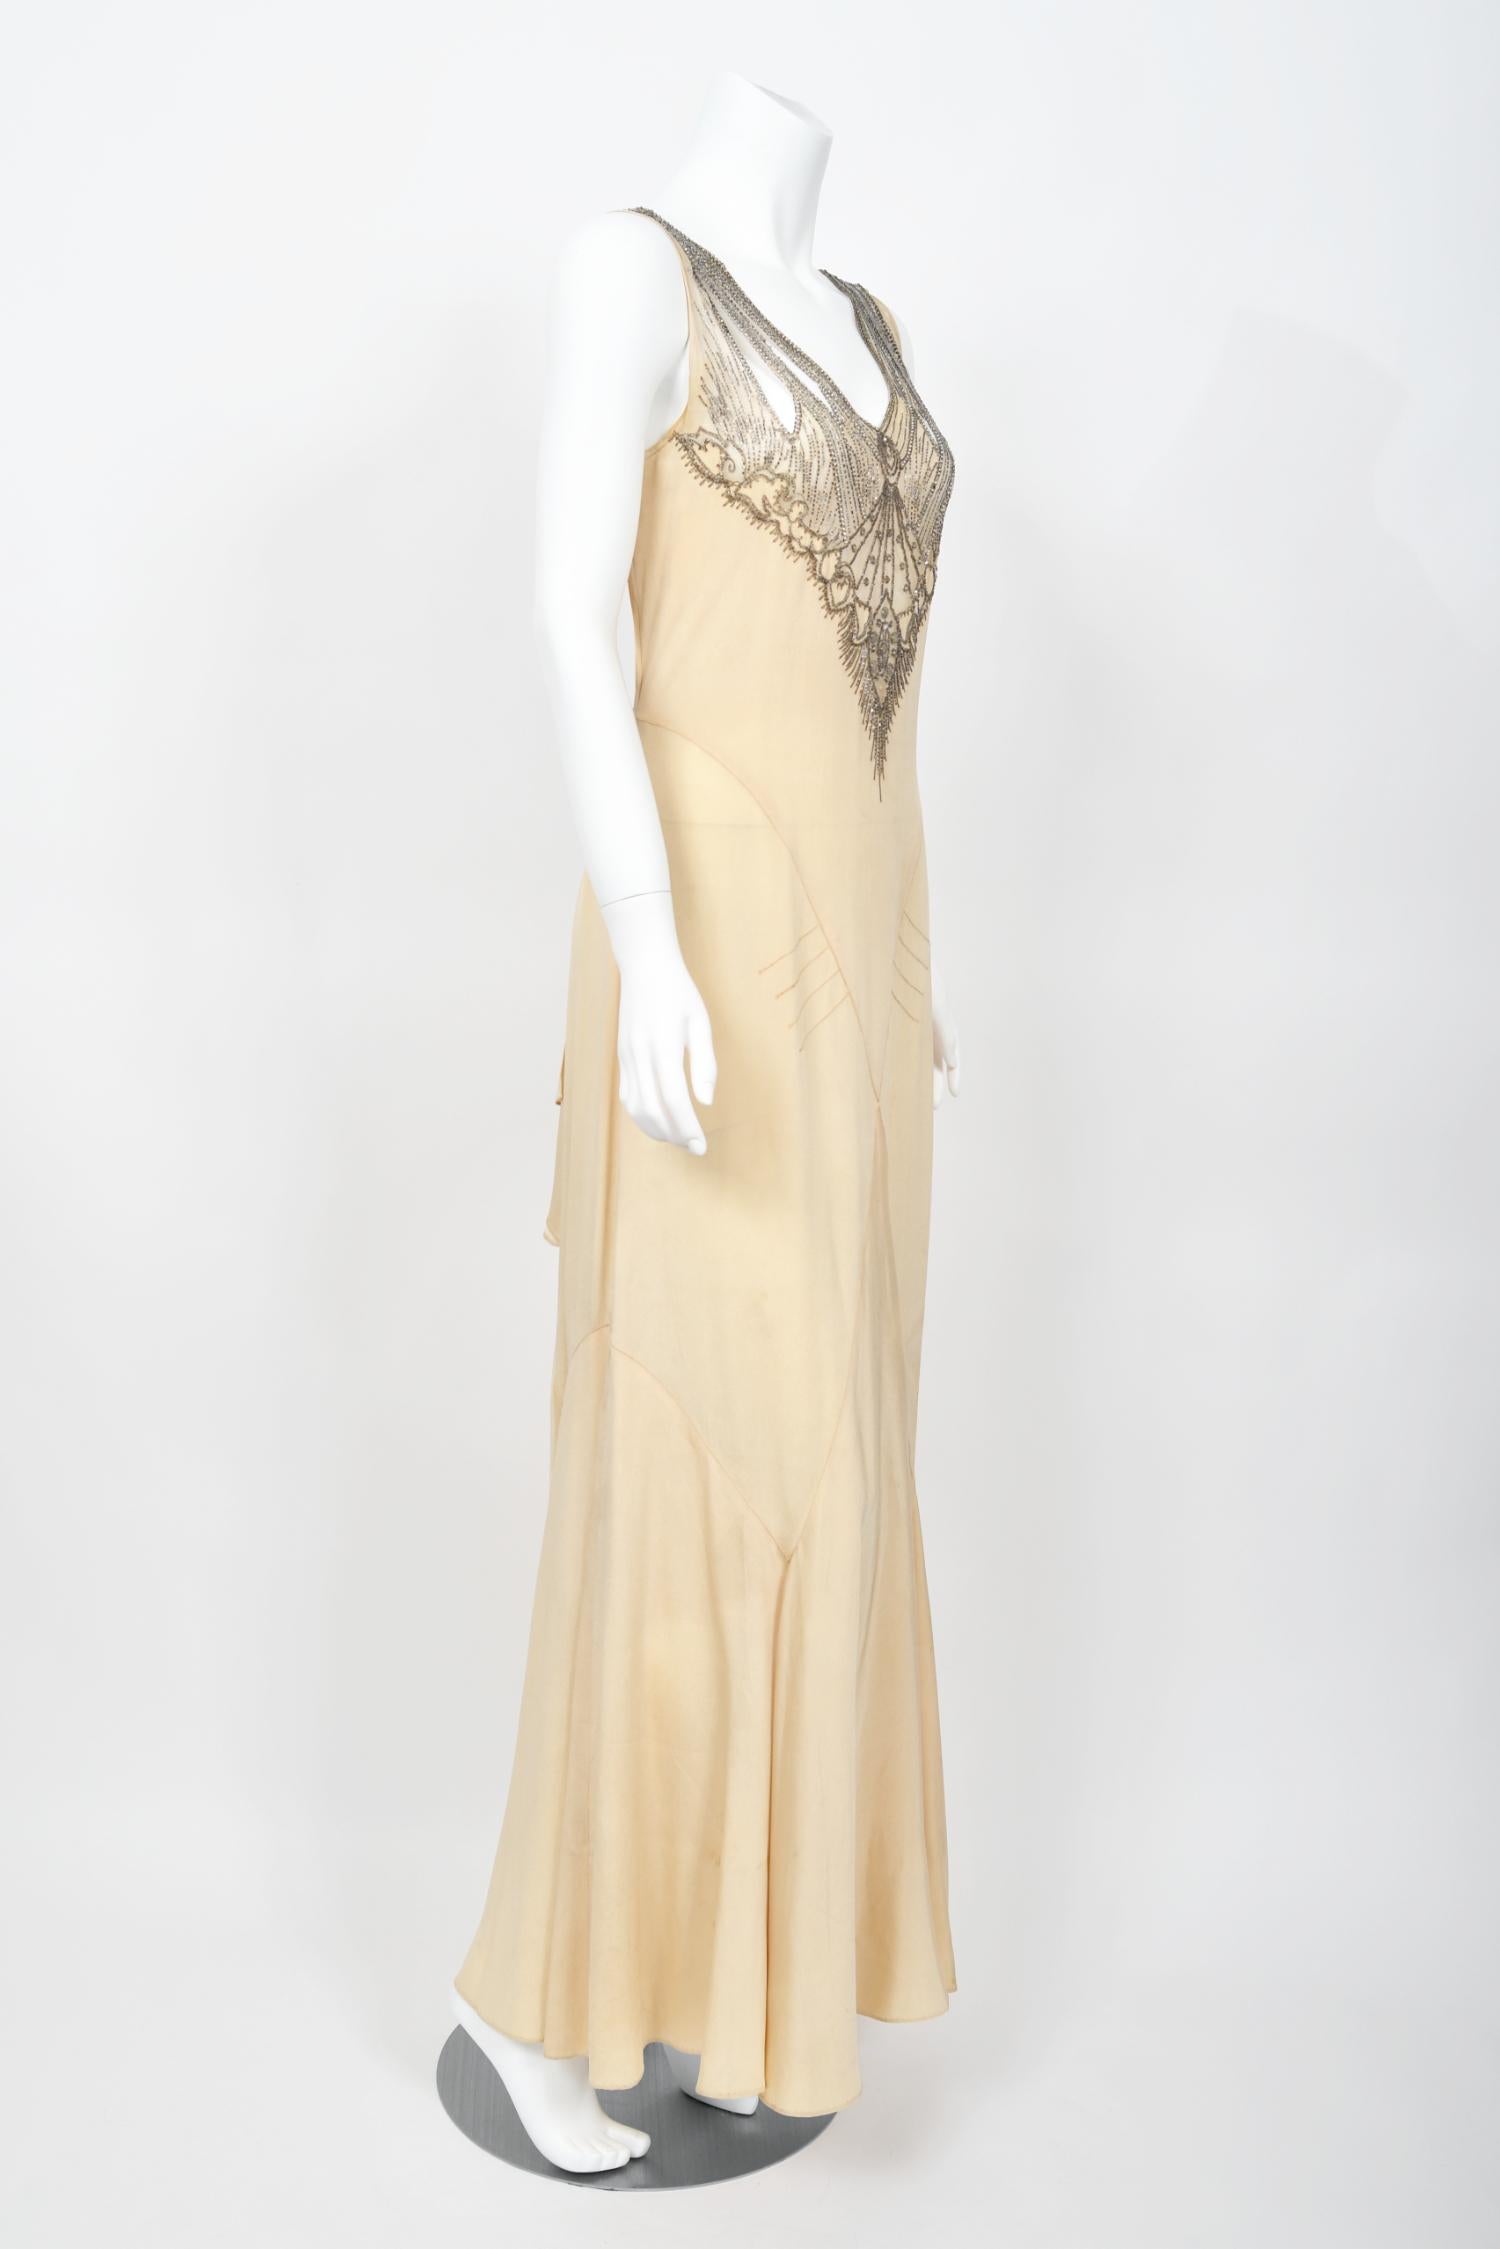 1930's French Ivory Creme Silk Beaded Sheer Illusion Deco Bias-Cut Bridal Gown   For Sale 7